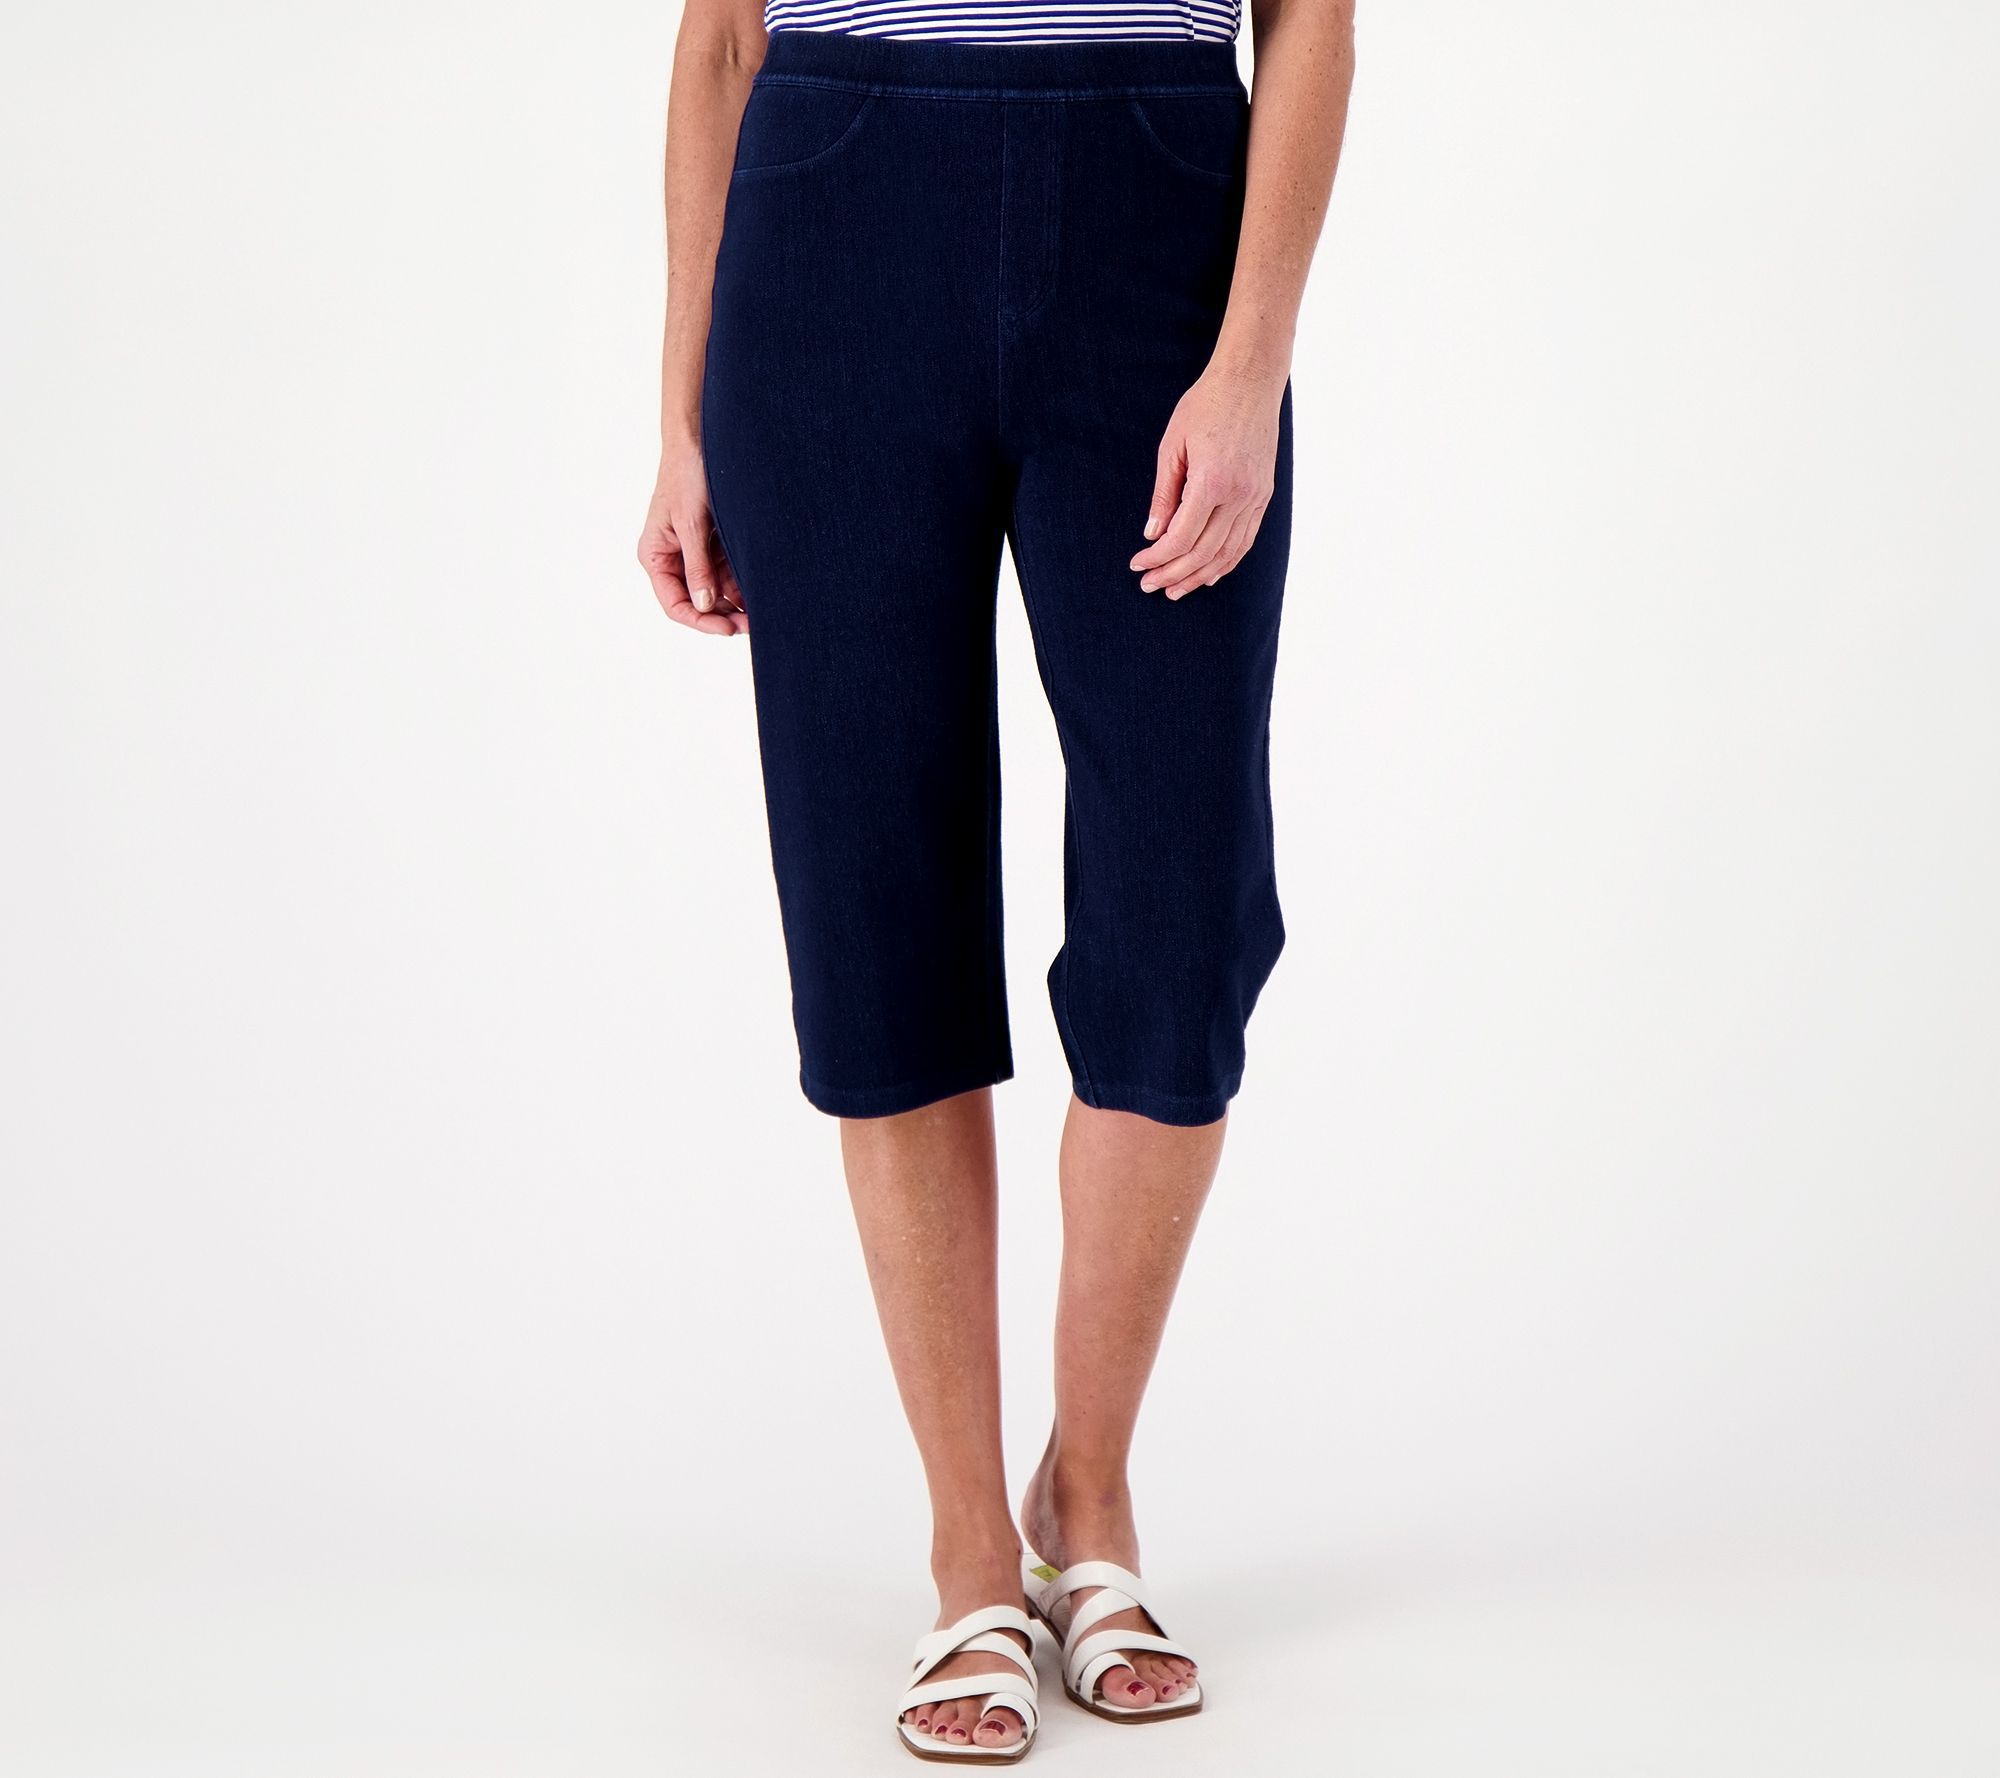 Women's Pedal Pushers Pants  Relaxed & Skinny fit 